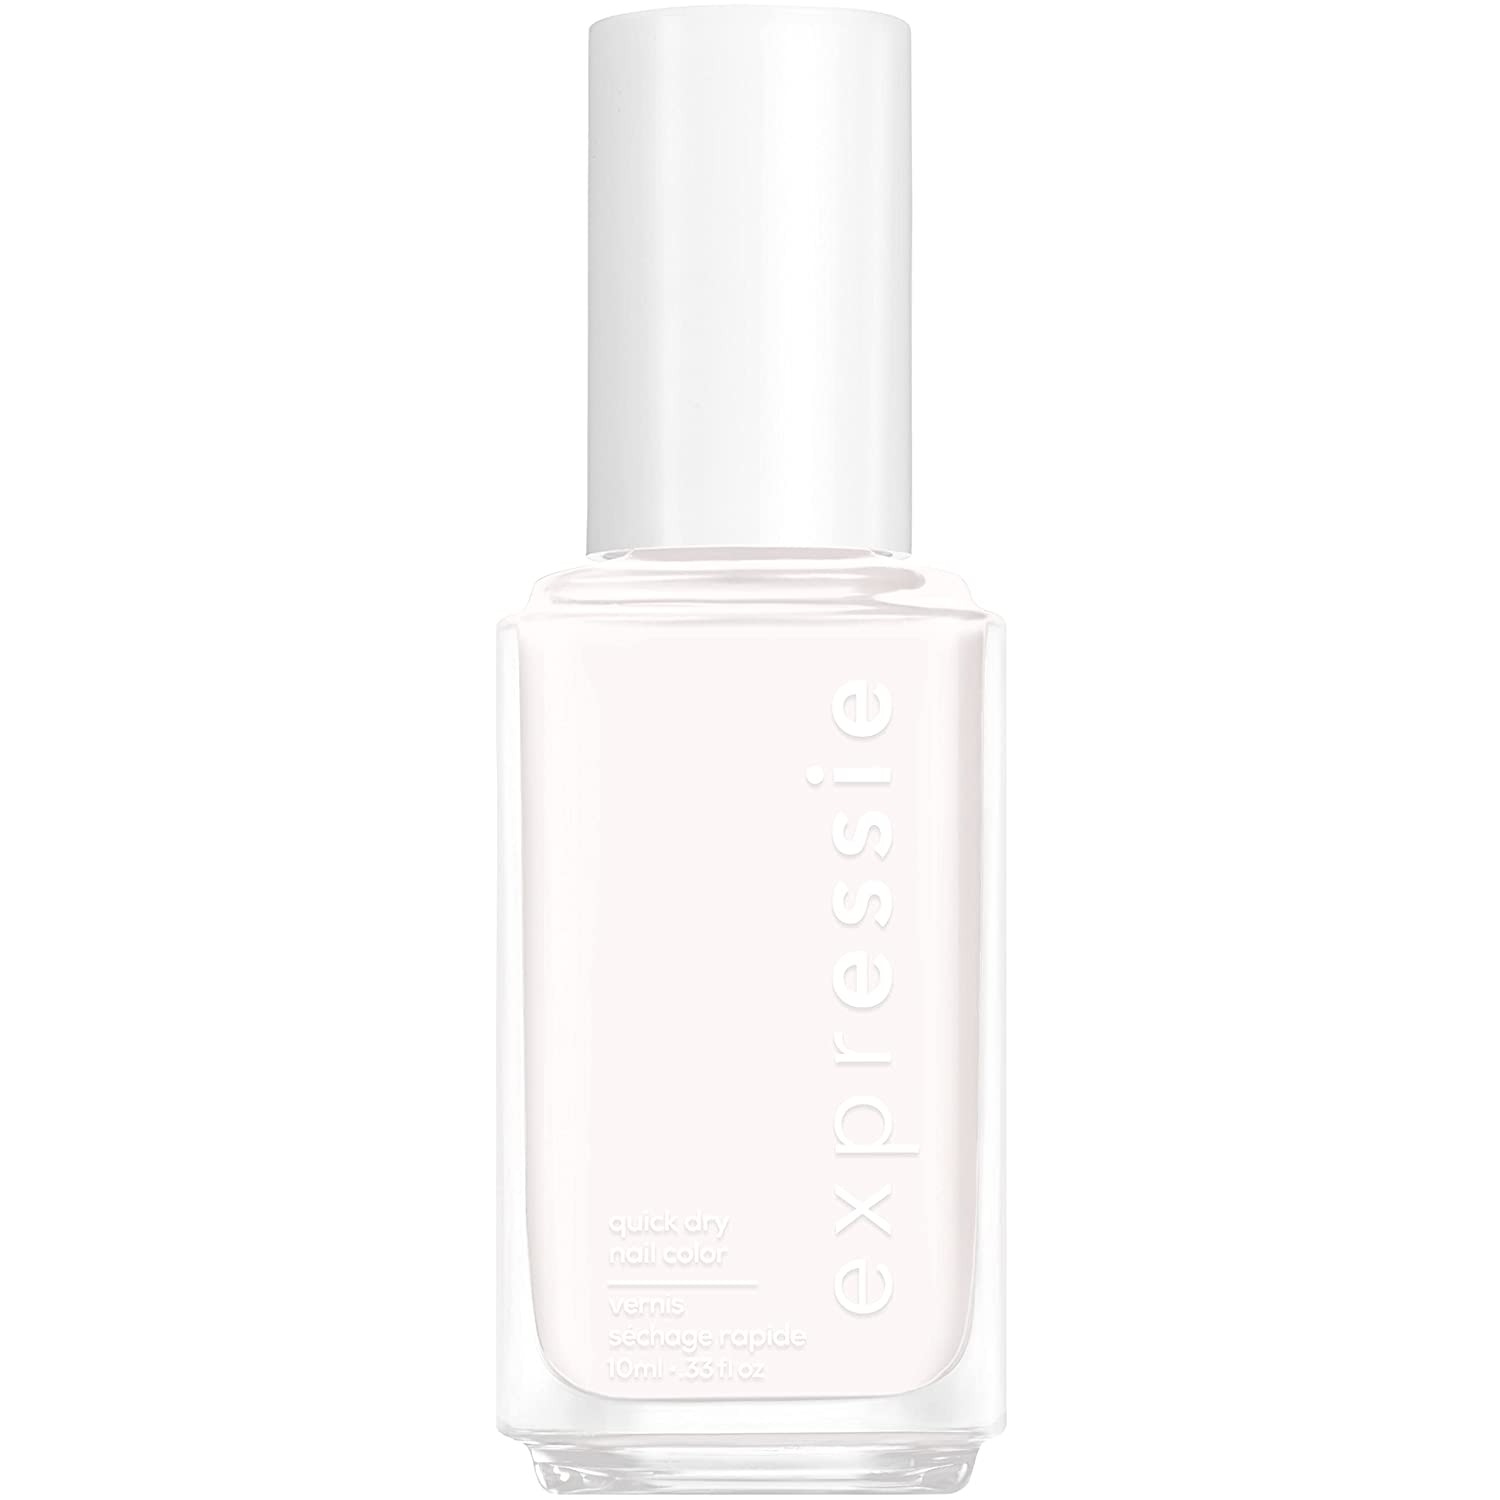 Essie Expressie Quick-Dry Nail Polish in Word On the Street